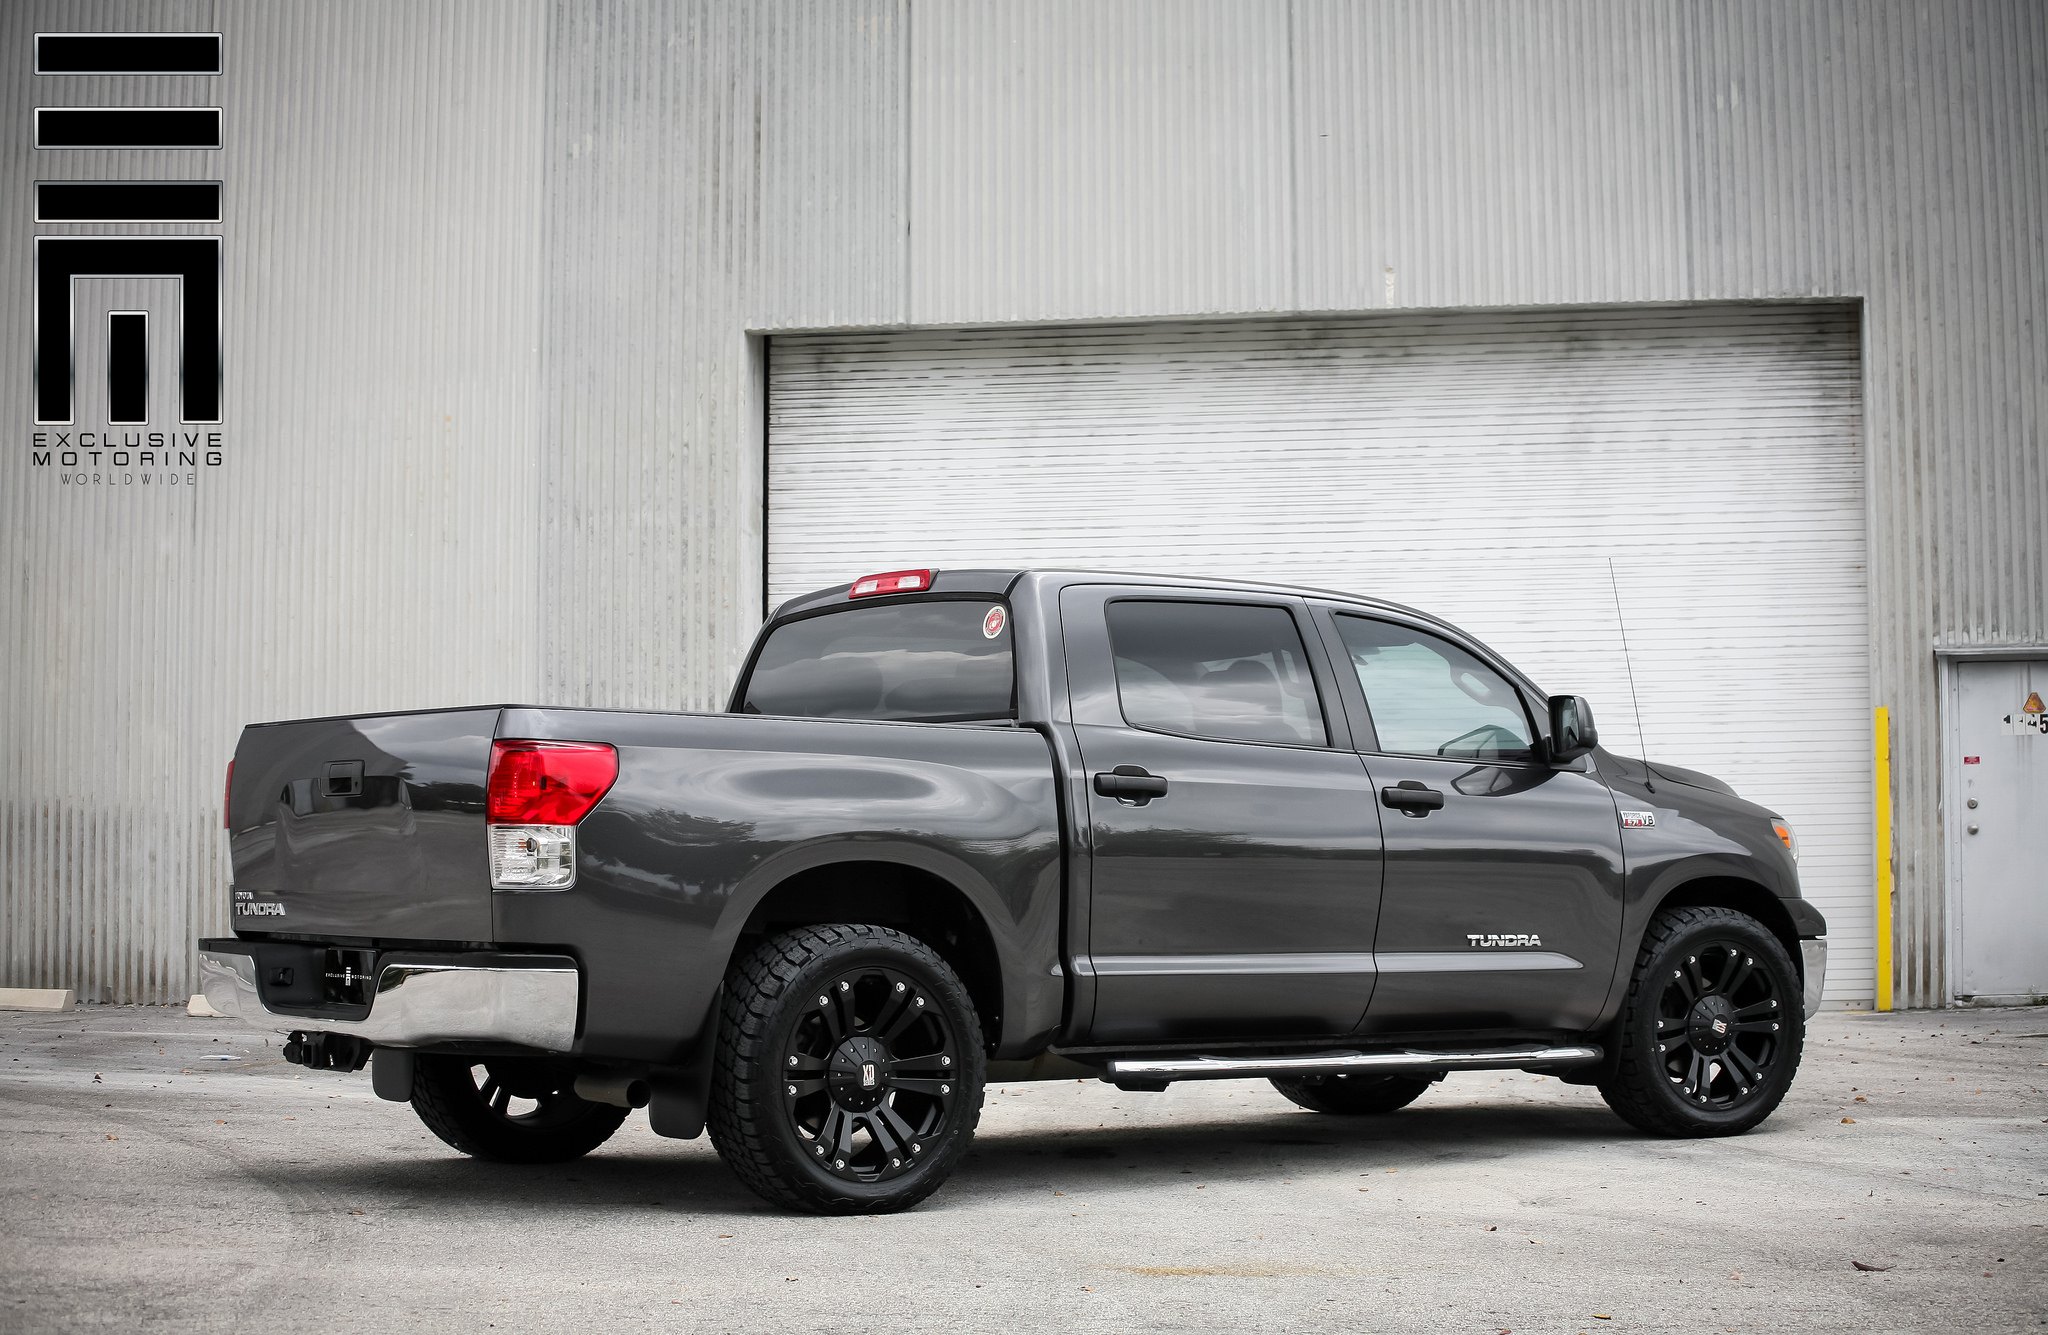 Black XD Monster Wheels on Toyota Tundra - Photo by Exclusive Motoring